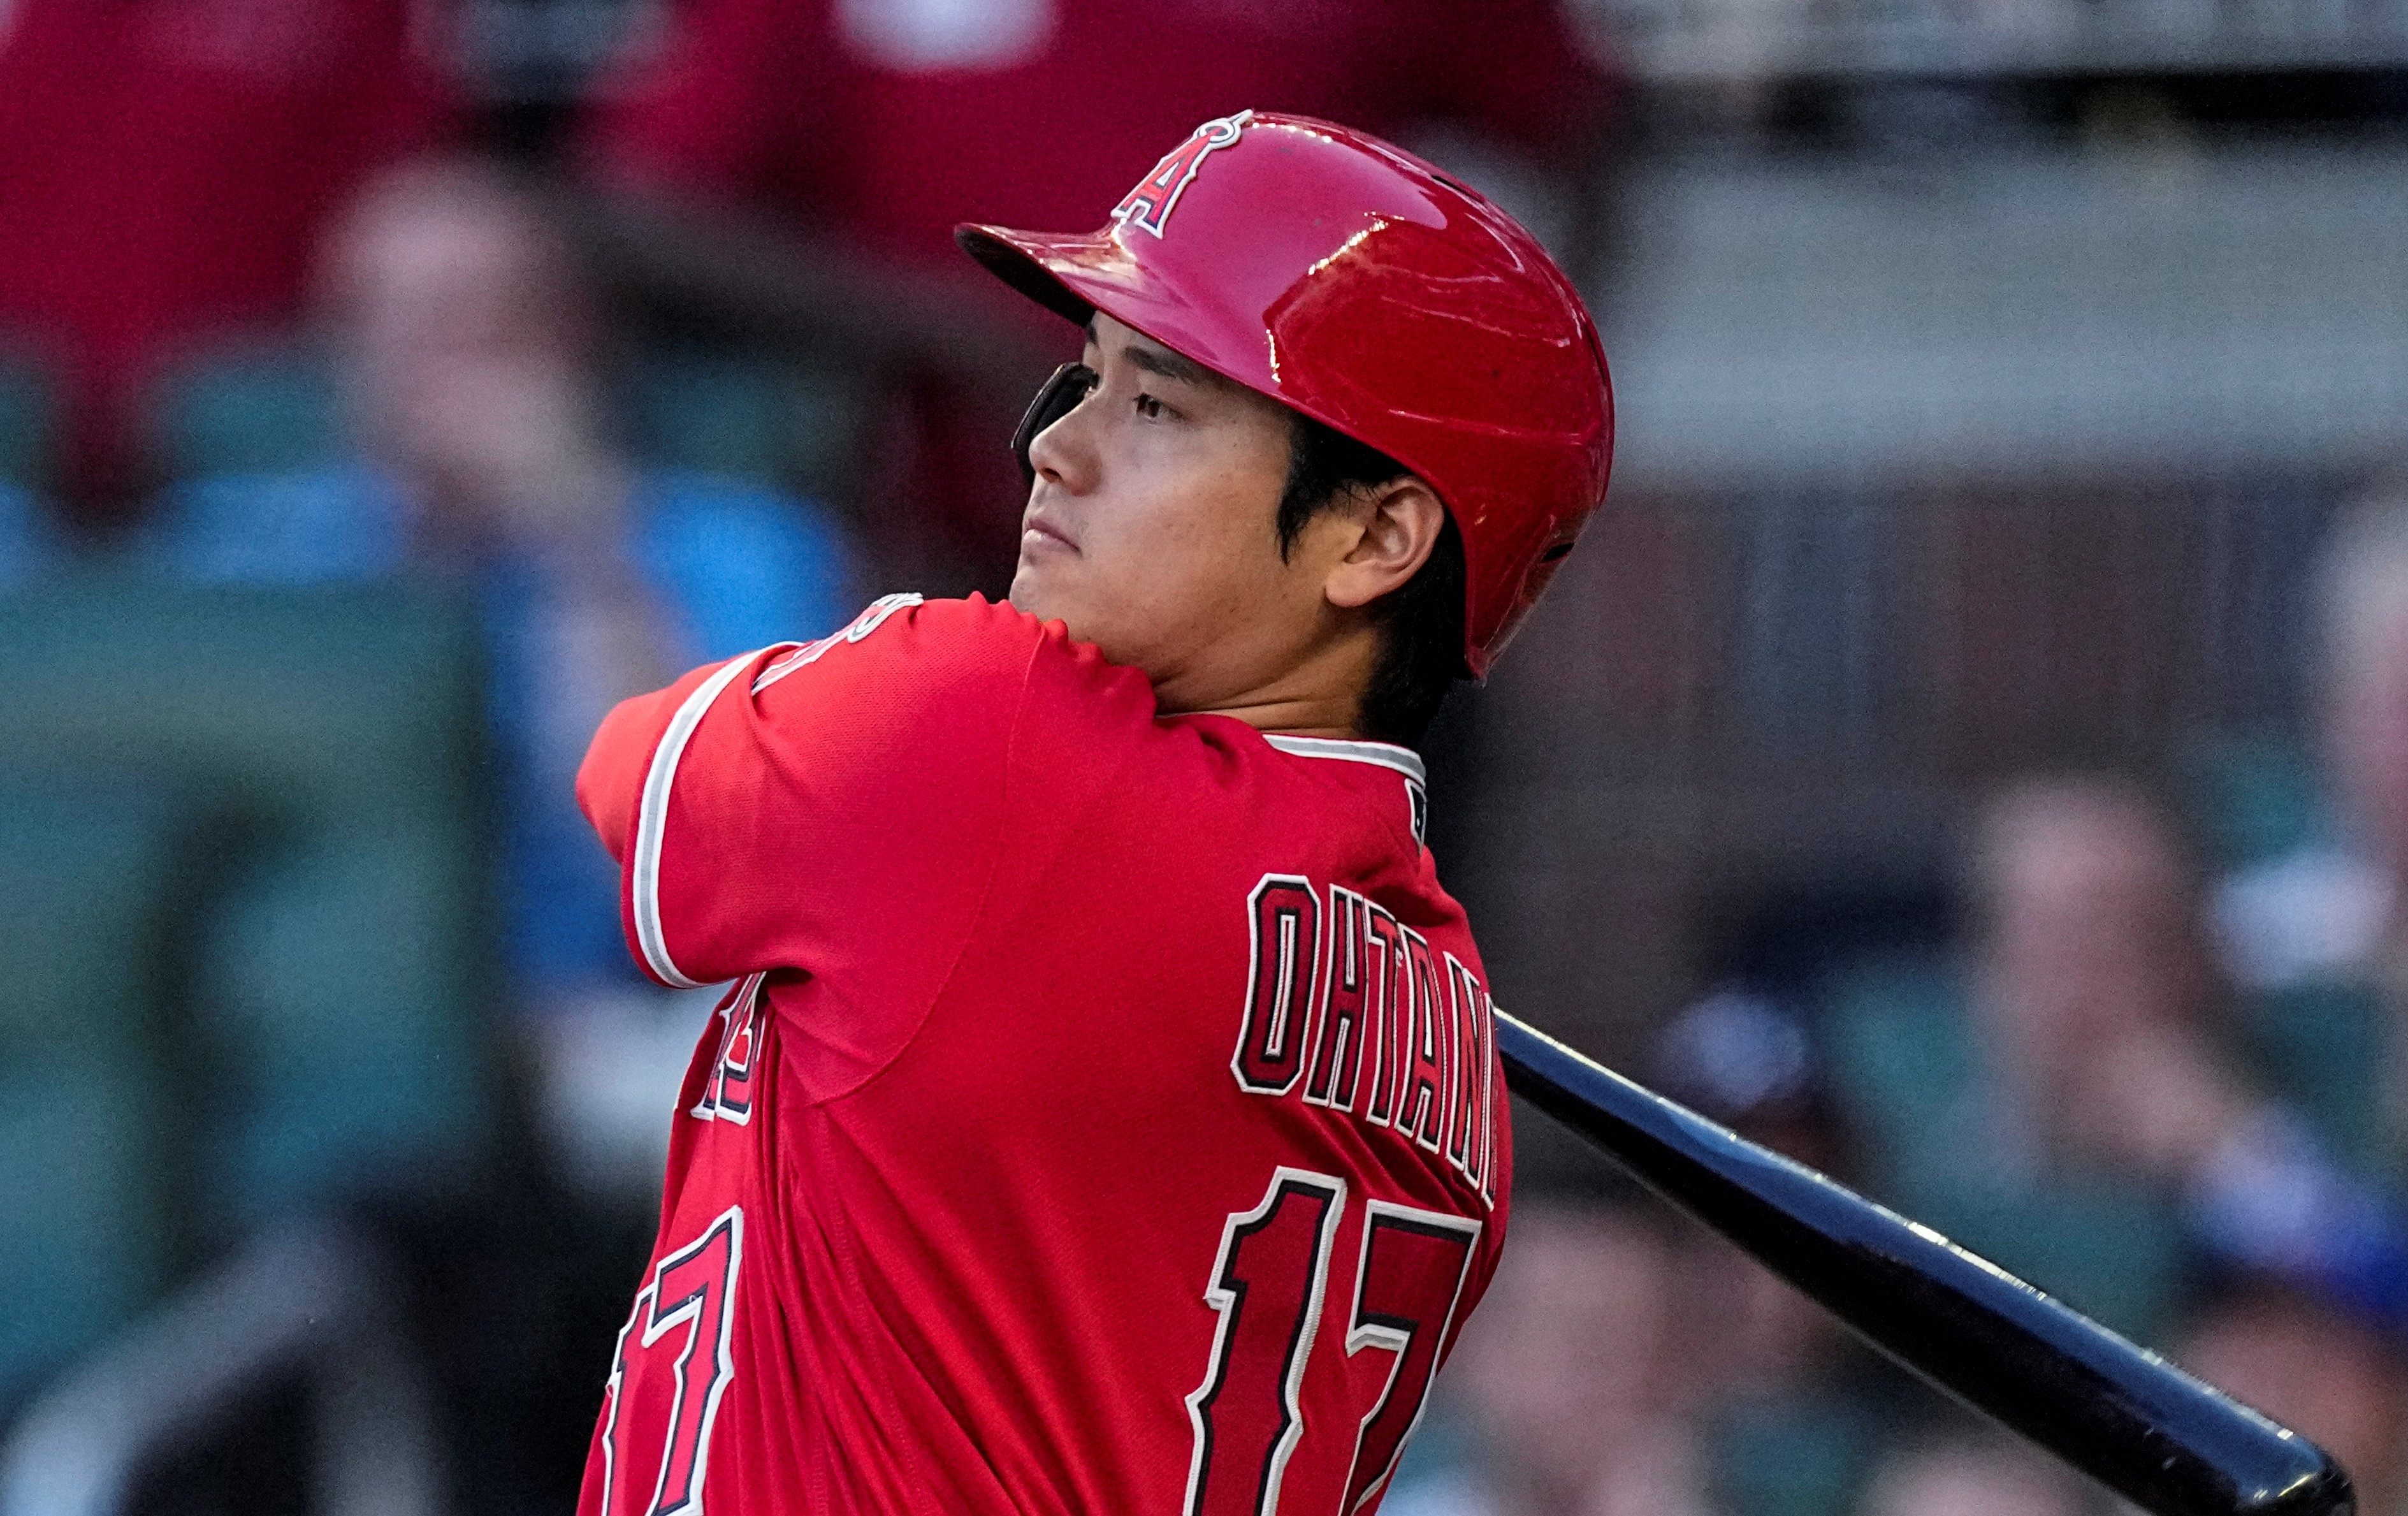 MLB News: Shohei Ohtani is returning for the Angels - McCovey Chronicles